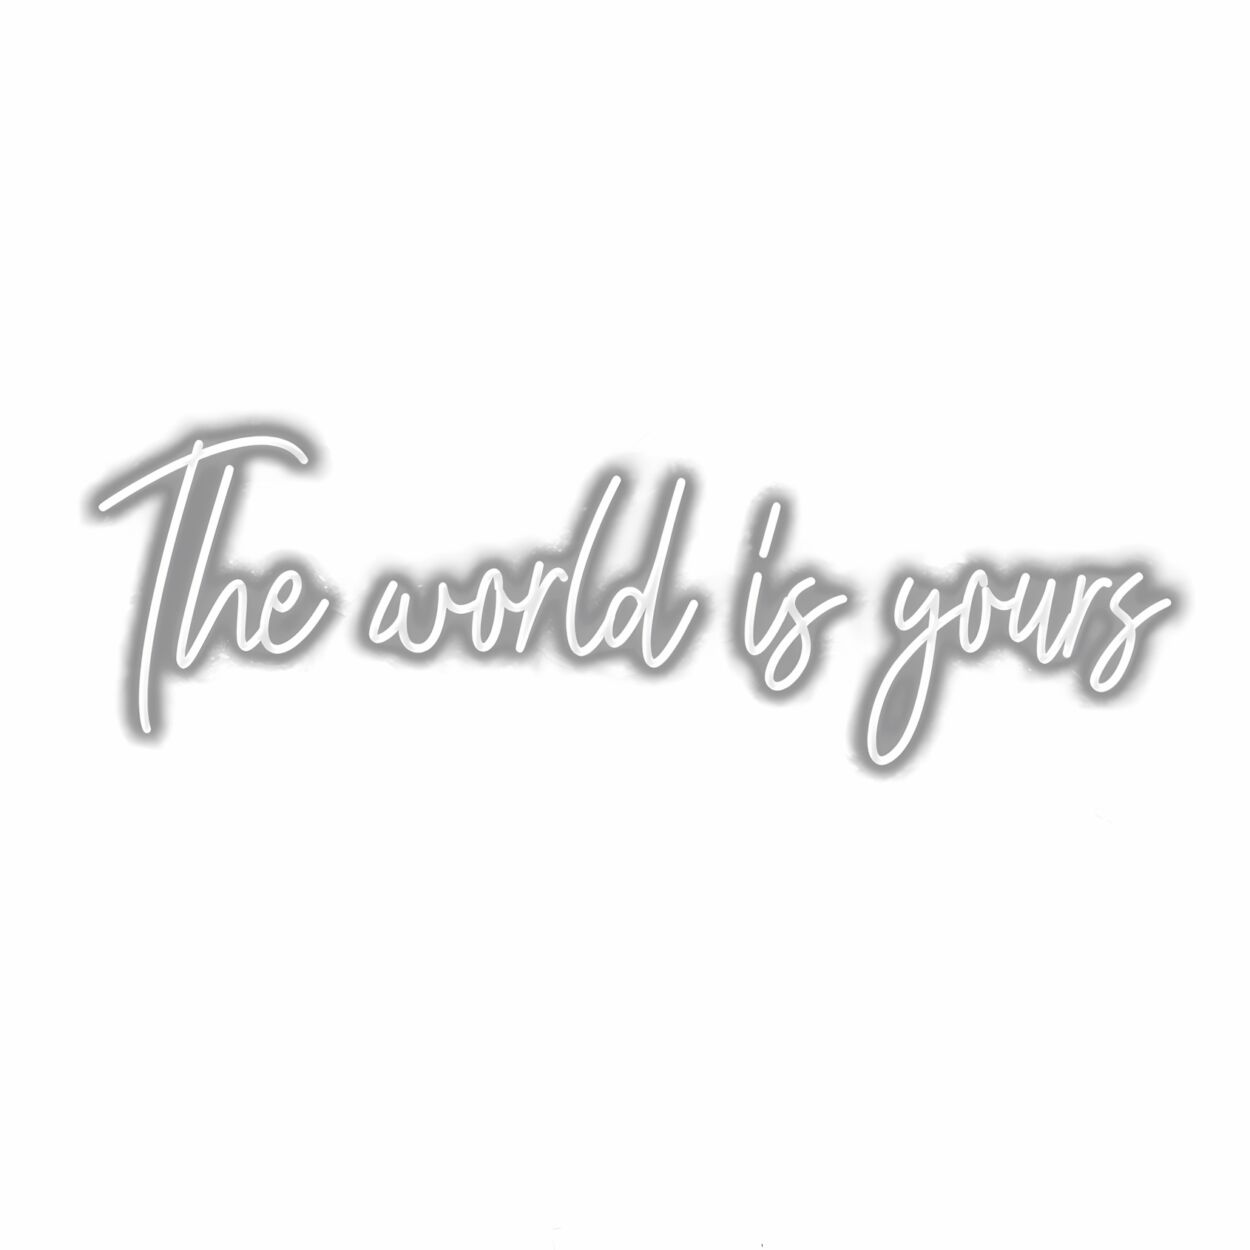 Inspirational quote "The world is yours" in cursive text.